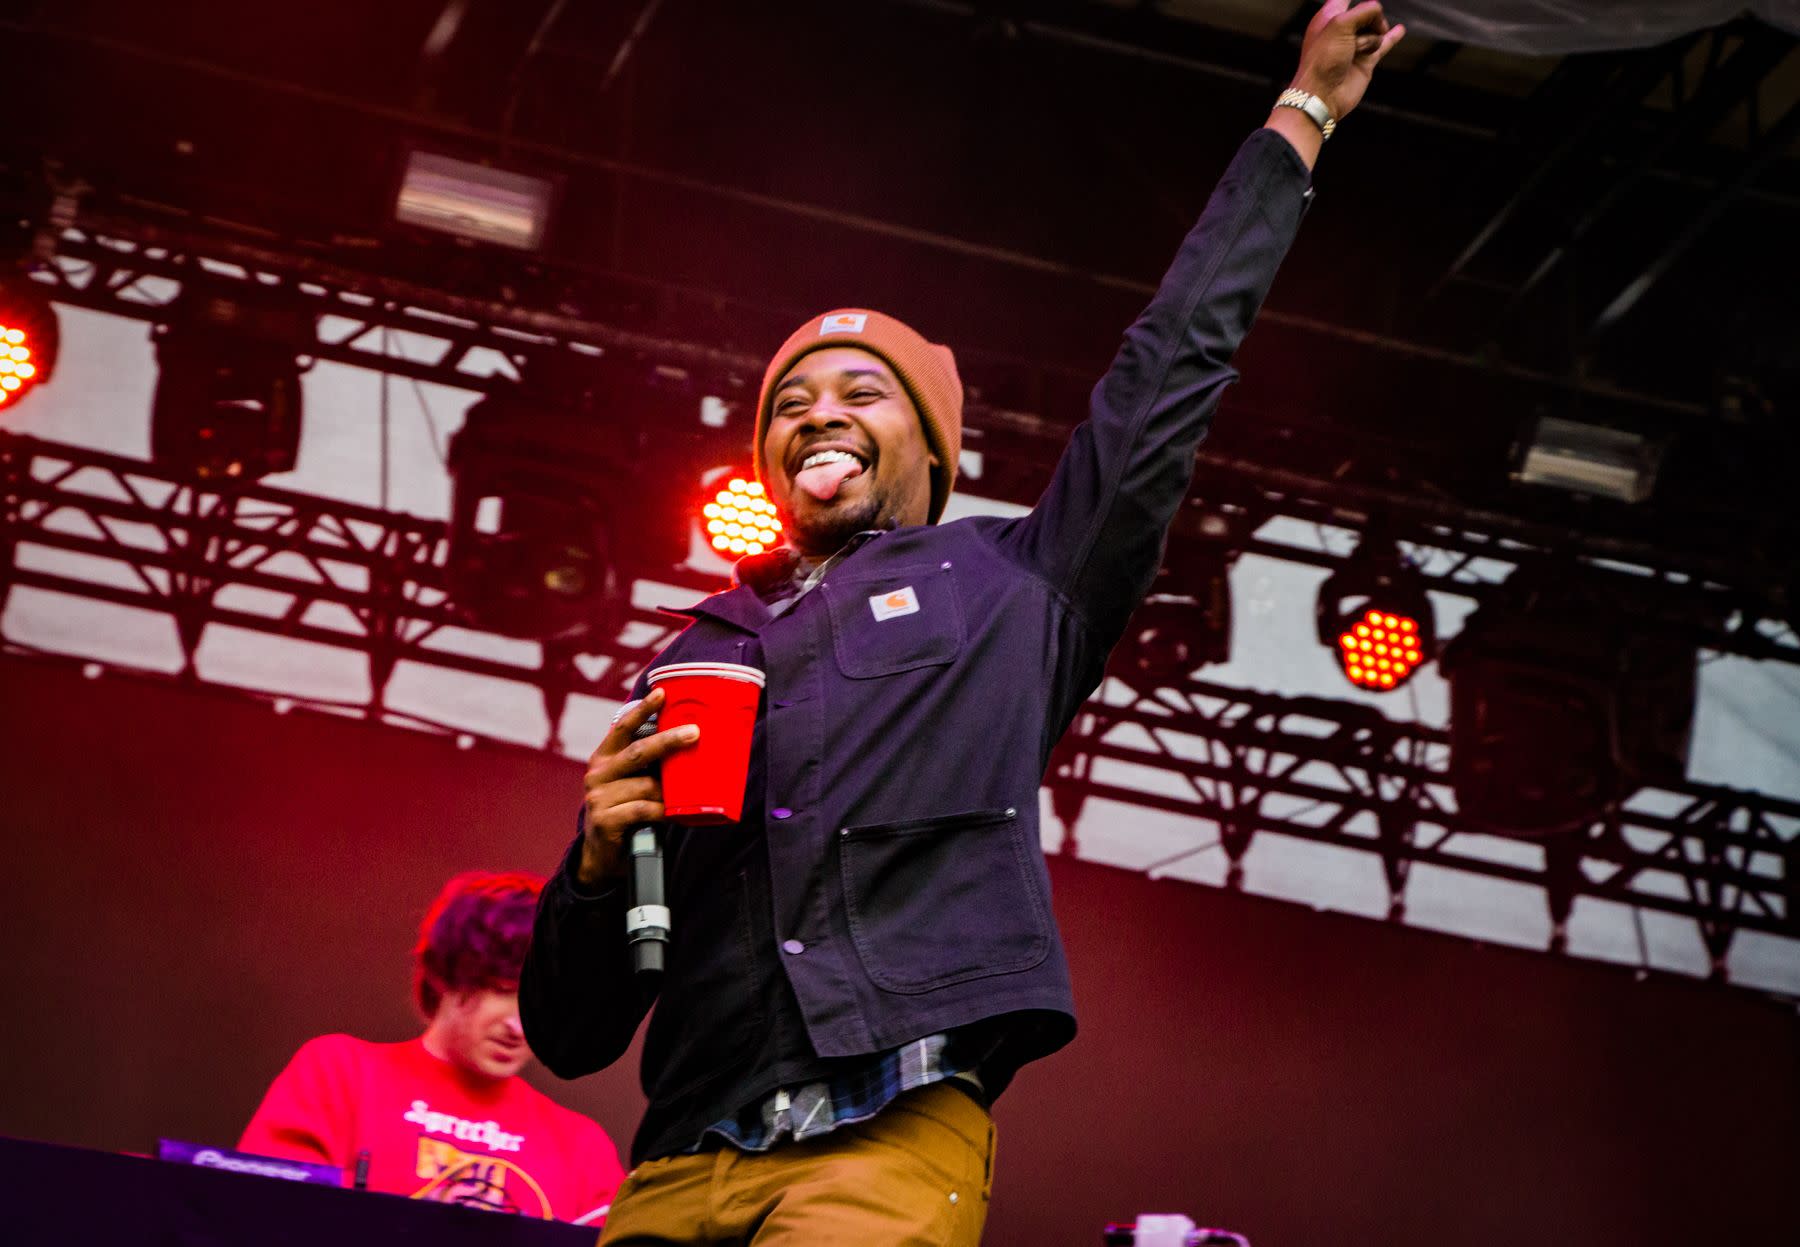 Danny Brown finally releases Live at the Majestic documentary Watch